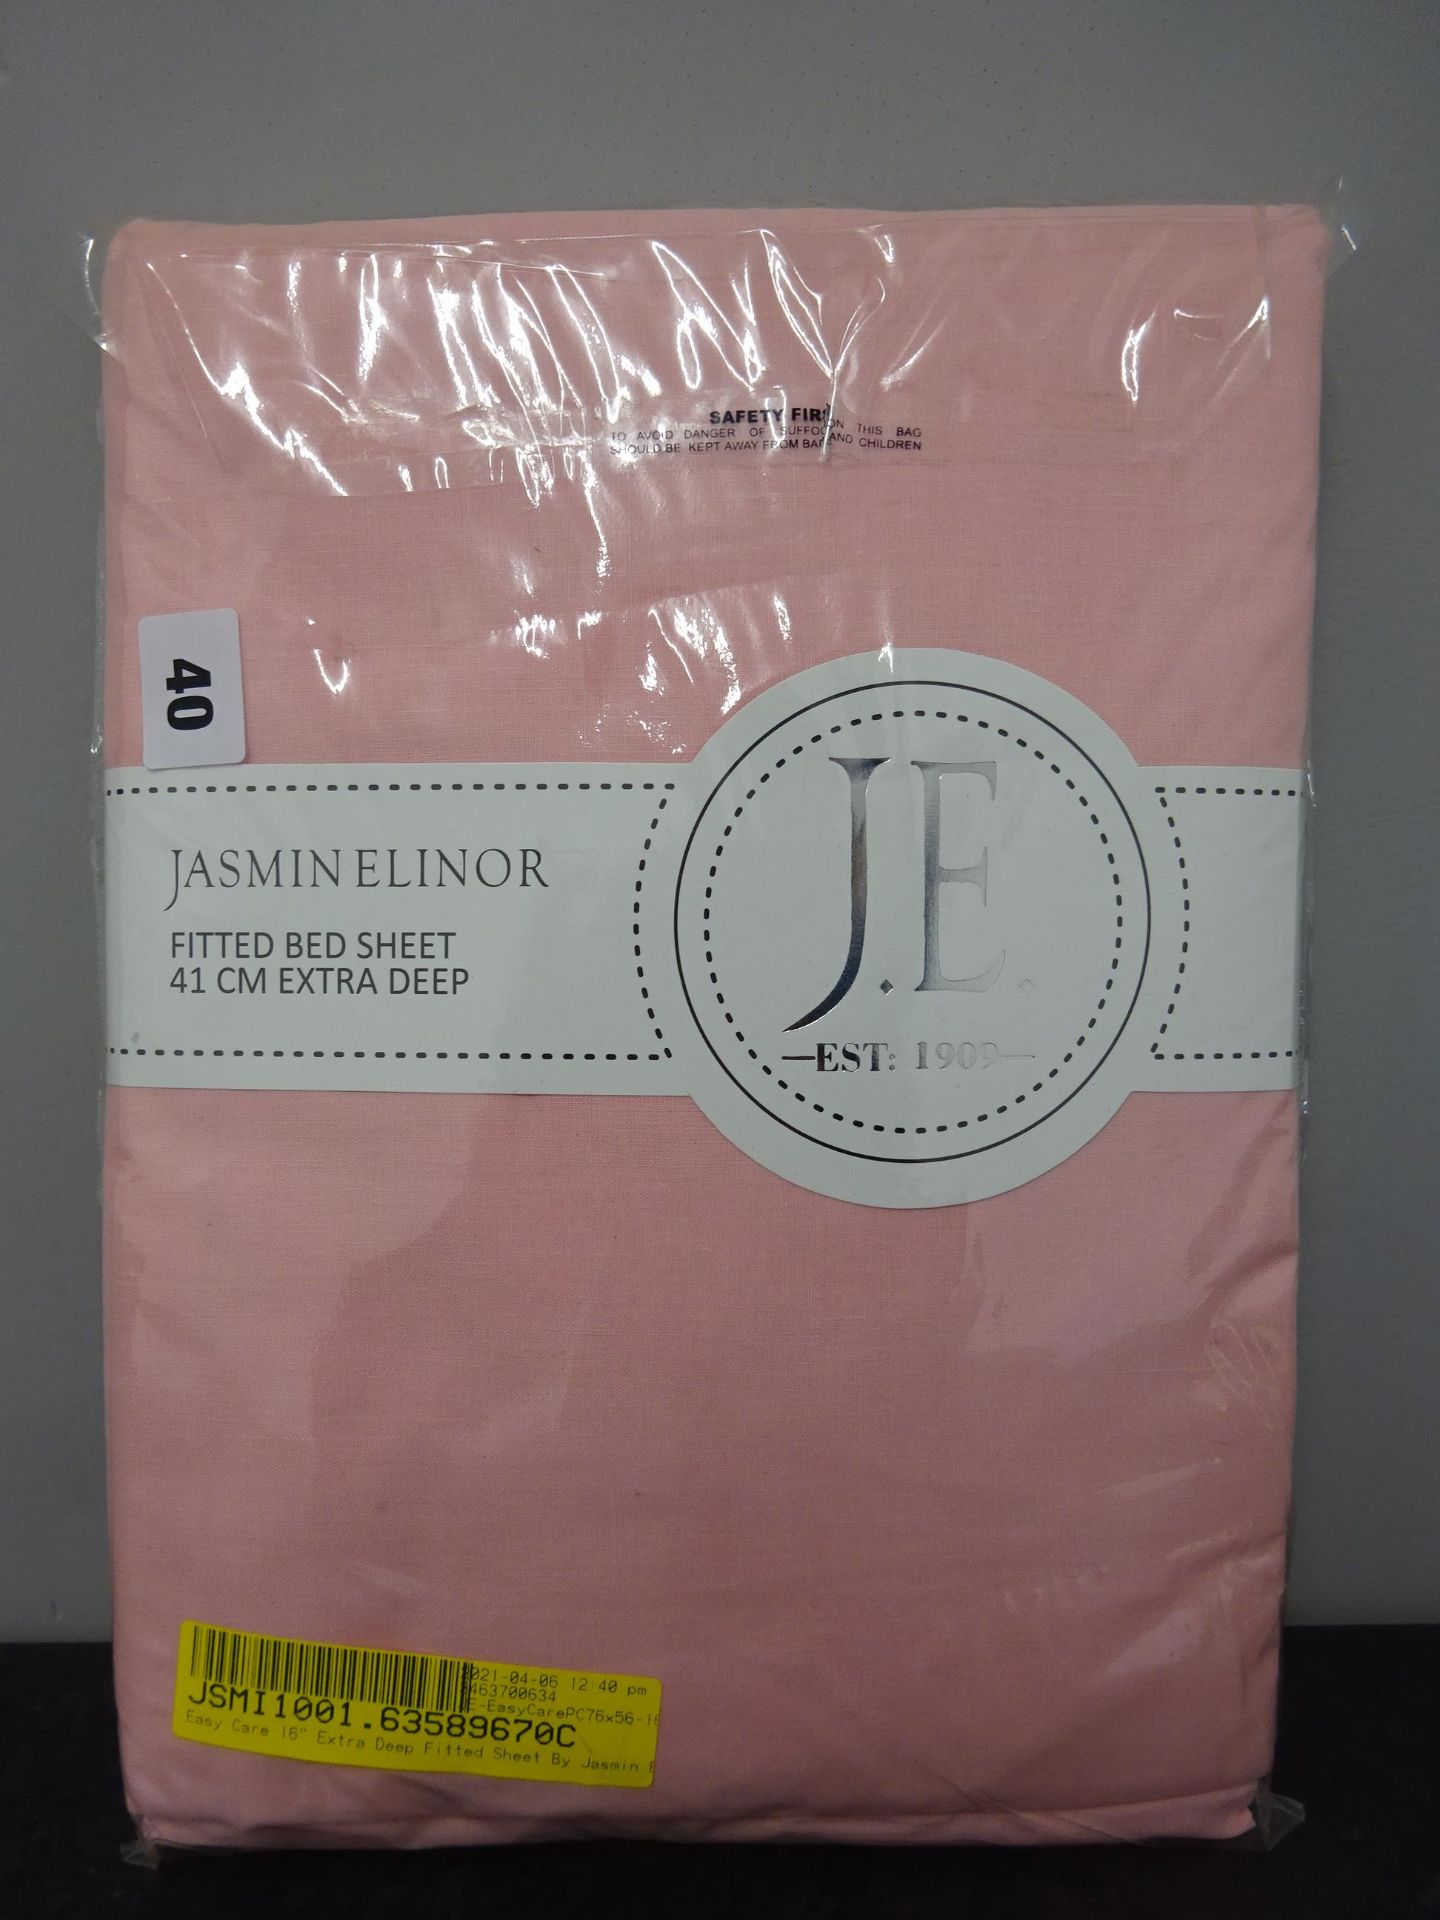 Easy Care 16" Extra Deep Fitted Sheet By Jasmin Elinor - RRP £